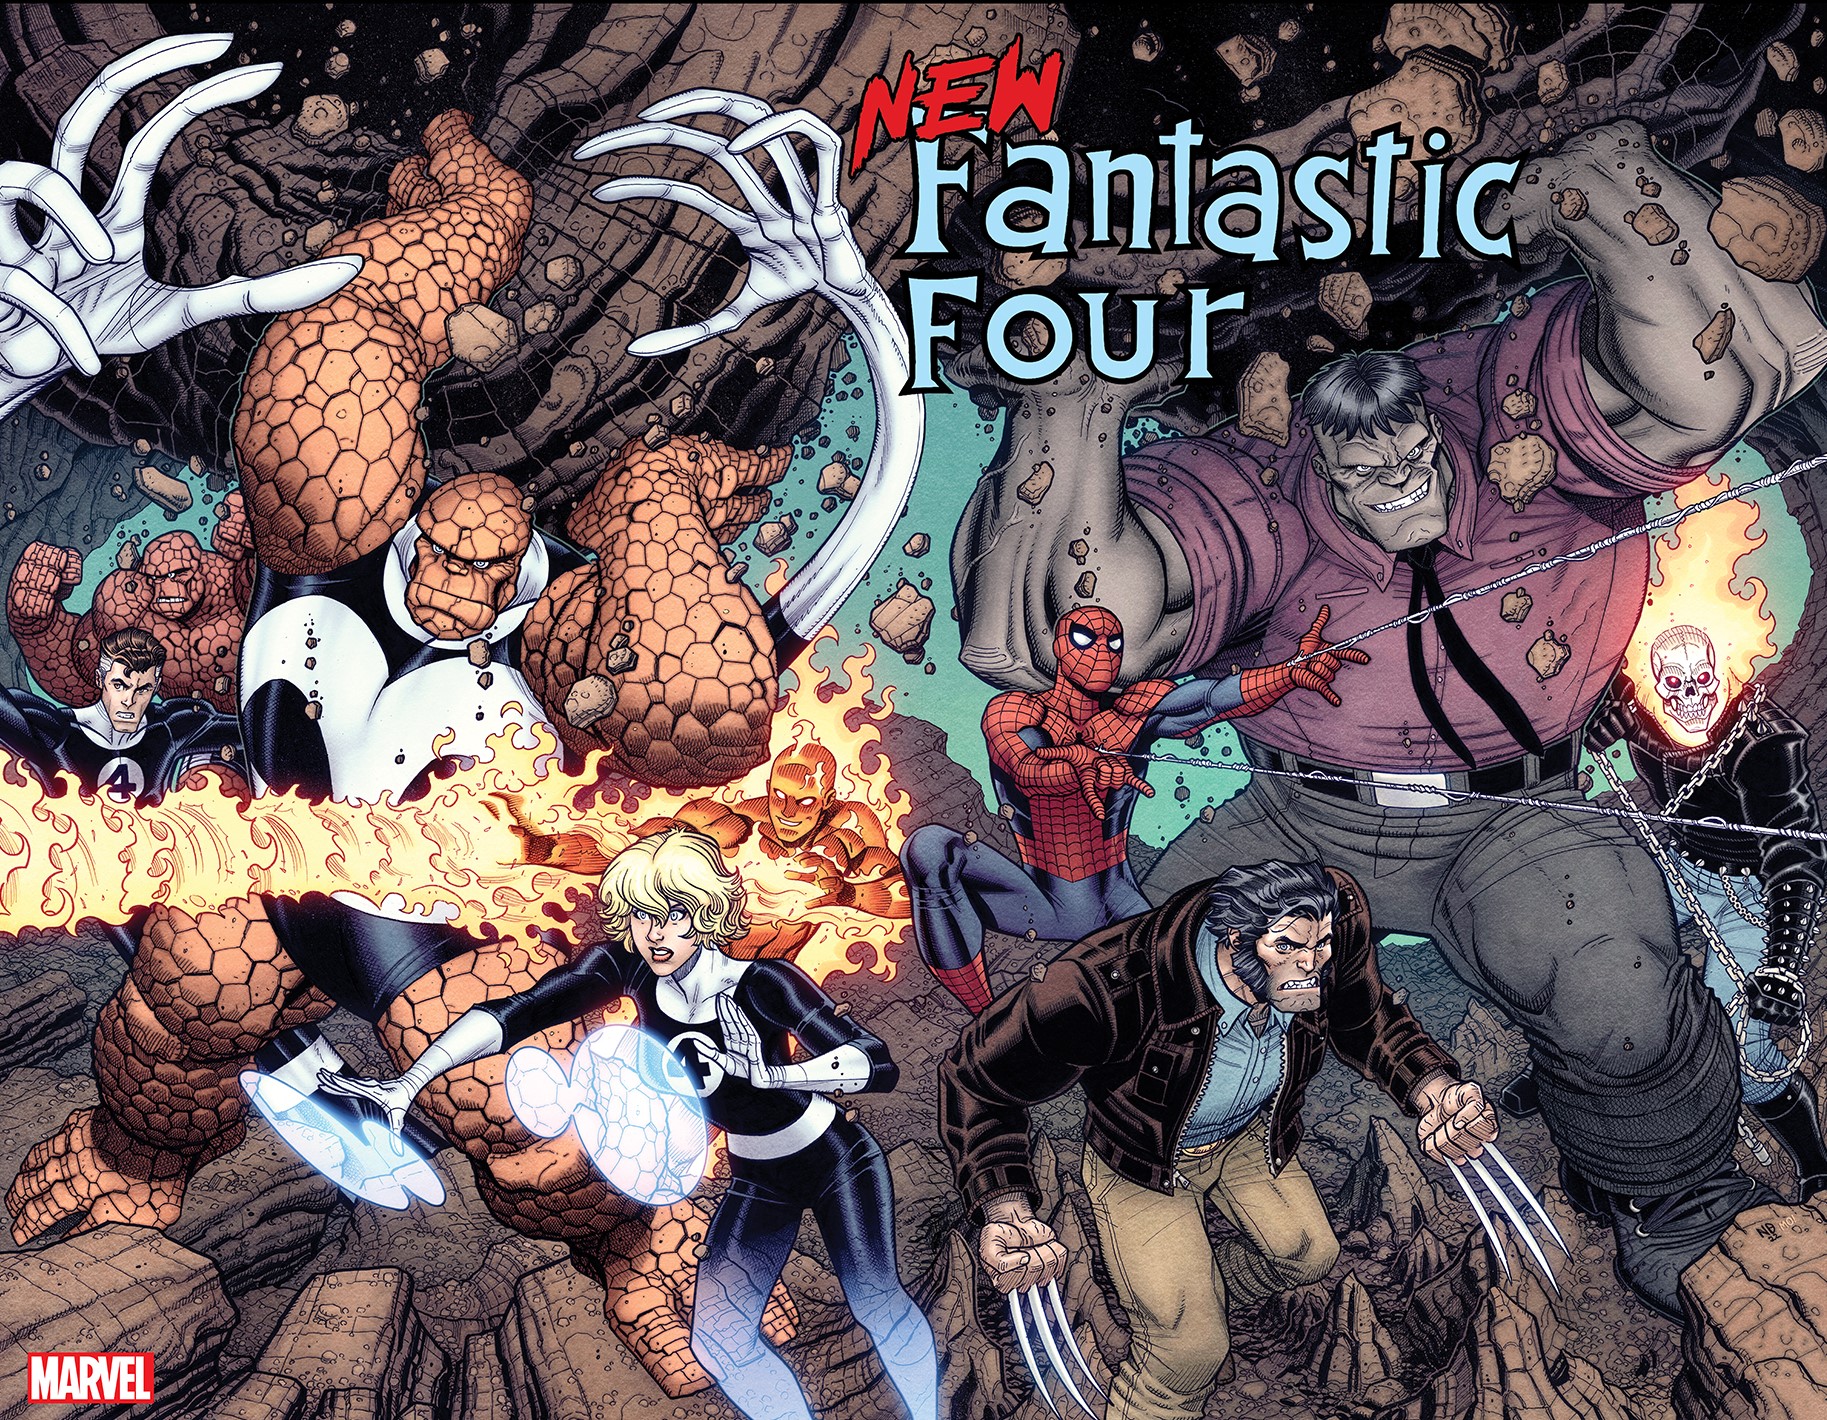 The Biggest Marvel Heroes Such as Wolverine and Spider-Man Reunite as the NEW FANTASTIC FOUR